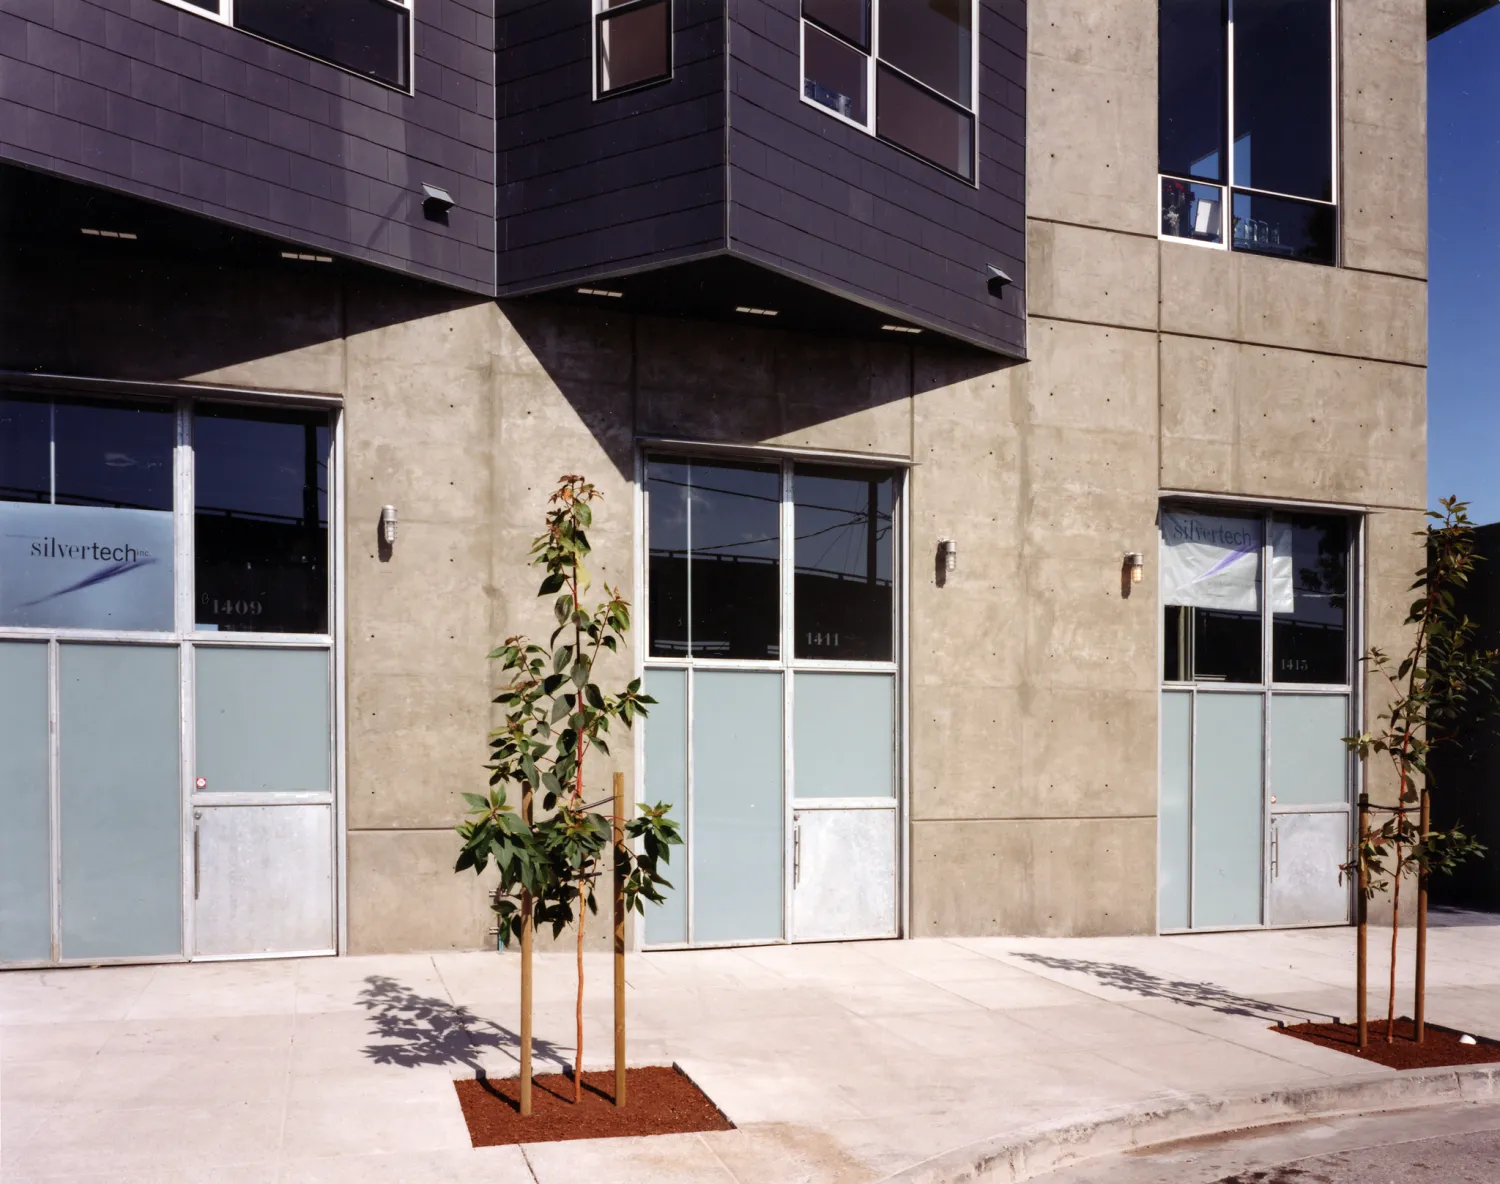 Exterior view of the ground-floor lofts at Indiana Industrial Lofts in San Francisco.